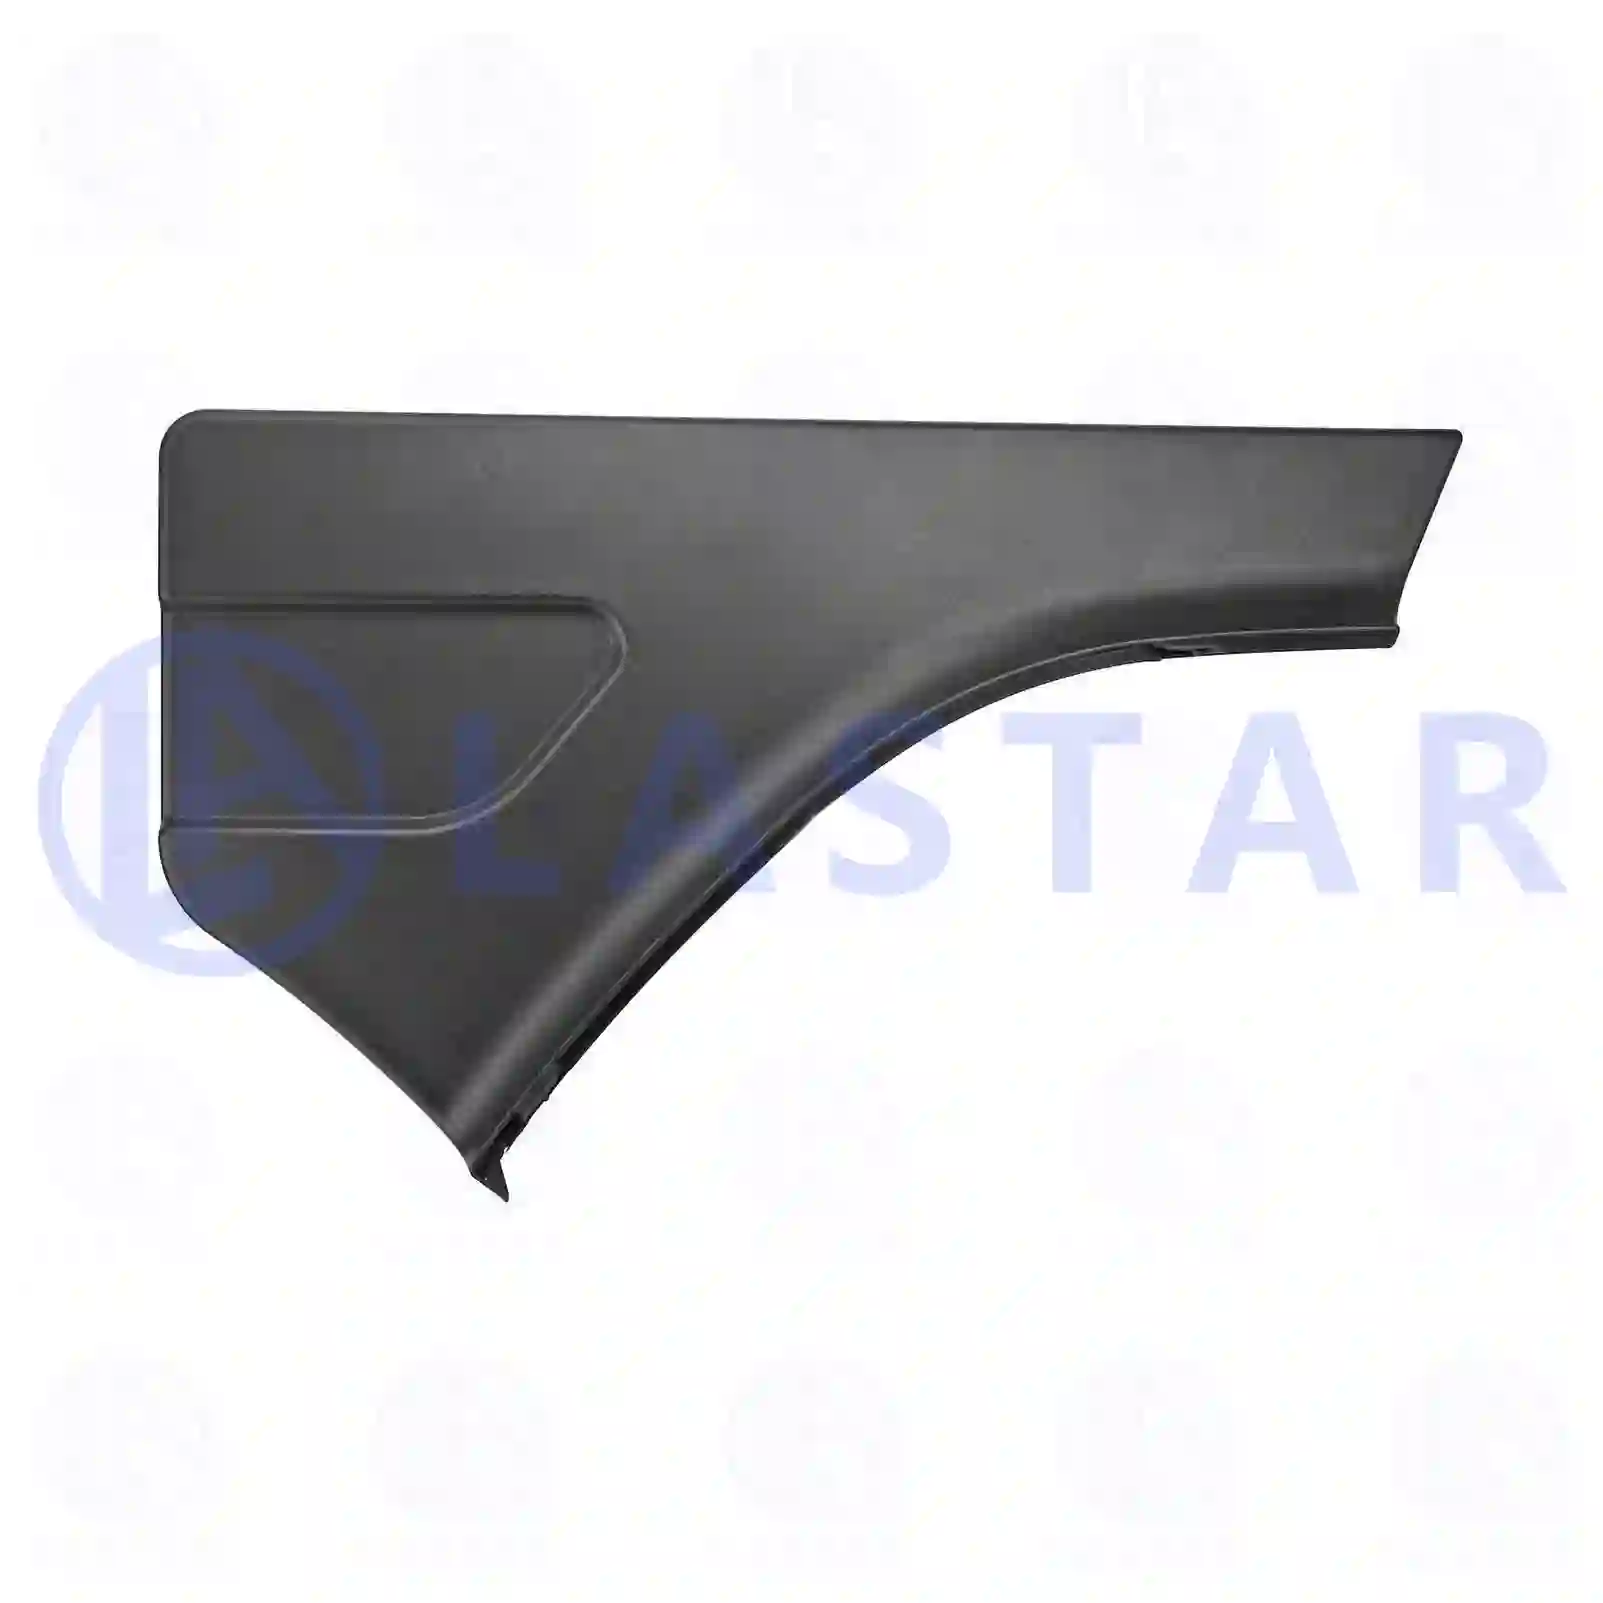 Fender cover, rear, right, 77721512, 1364666, ZG60751-0008 ||  77721512 Lastar Spare Part | Truck Spare Parts, Auotomotive Spare Parts Fender cover, rear, right, 77721512, 1364666, ZG60751-0008 ||  77721512 Lastar Spare Part | Truck Spare Parts, Auotomotive Spare Parts